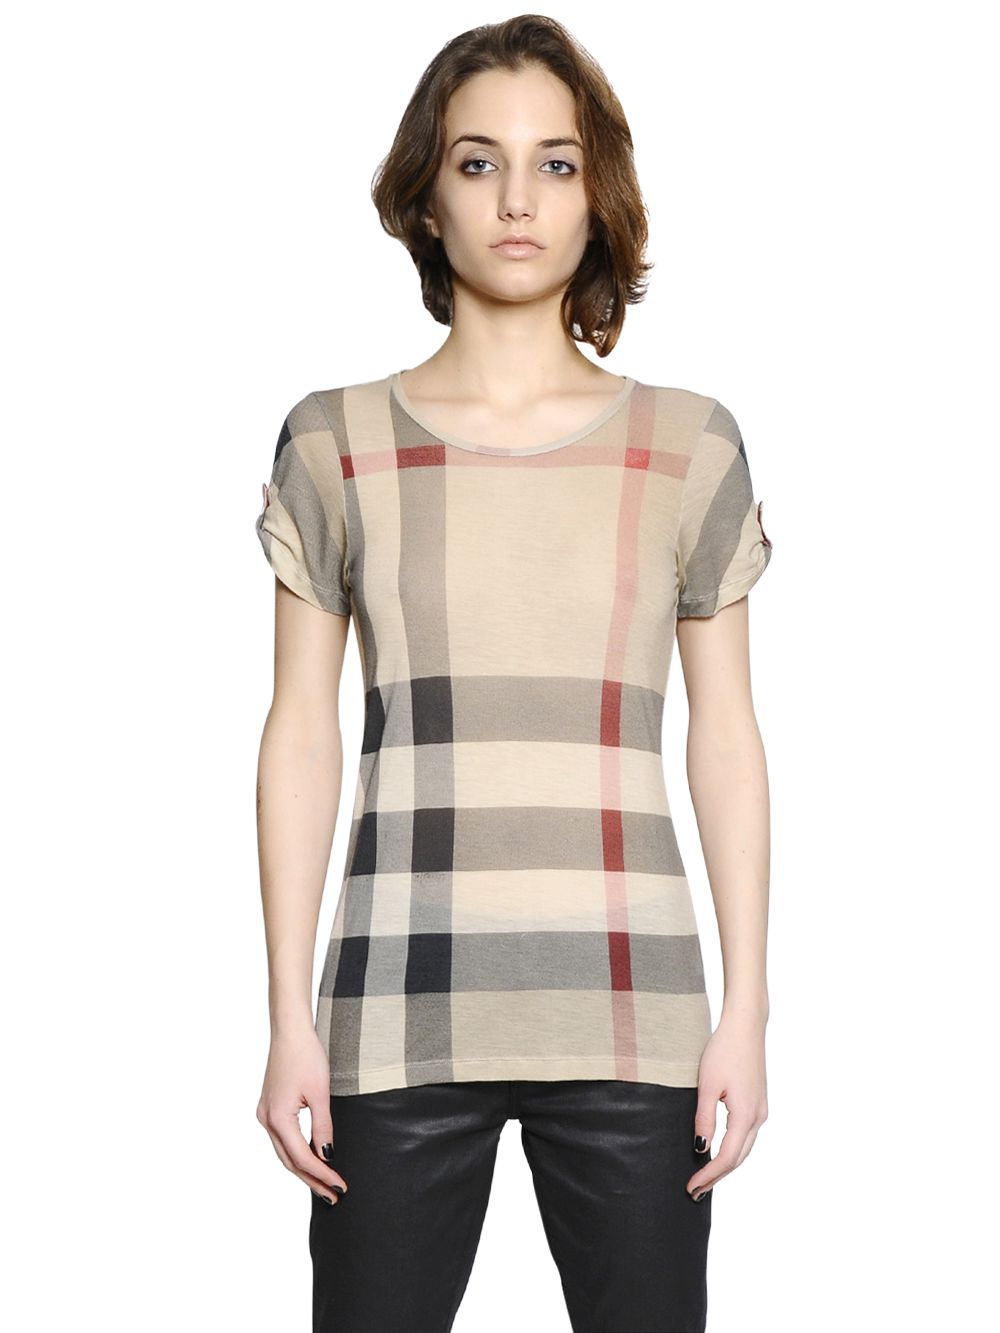 burberry shirts for women sale